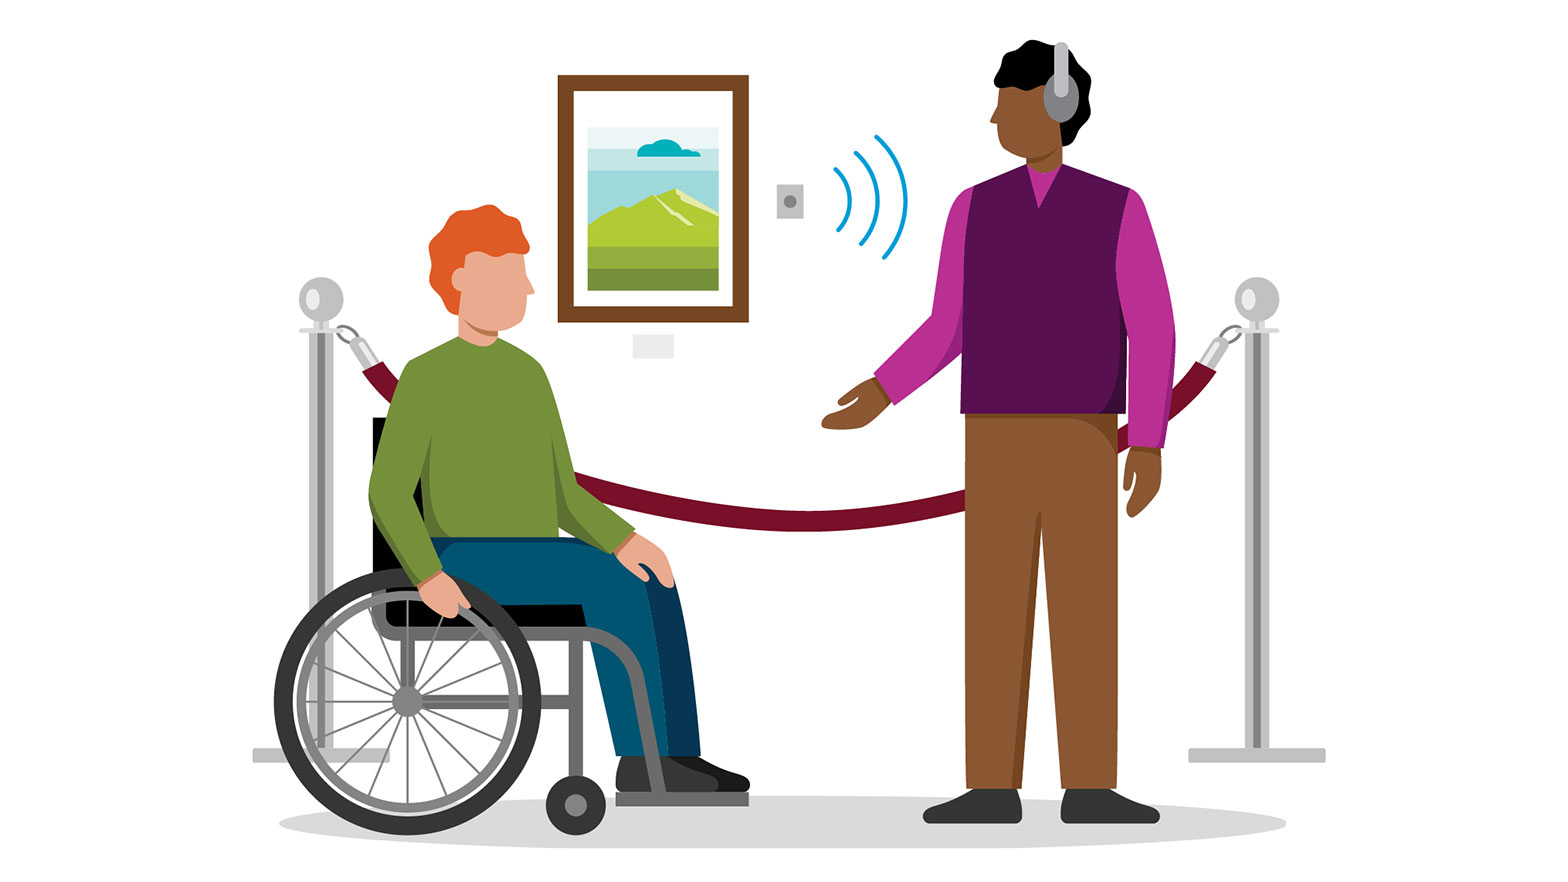 illustration of a person in a wheelchair looking at a piece of art and another person using an assisted listening device